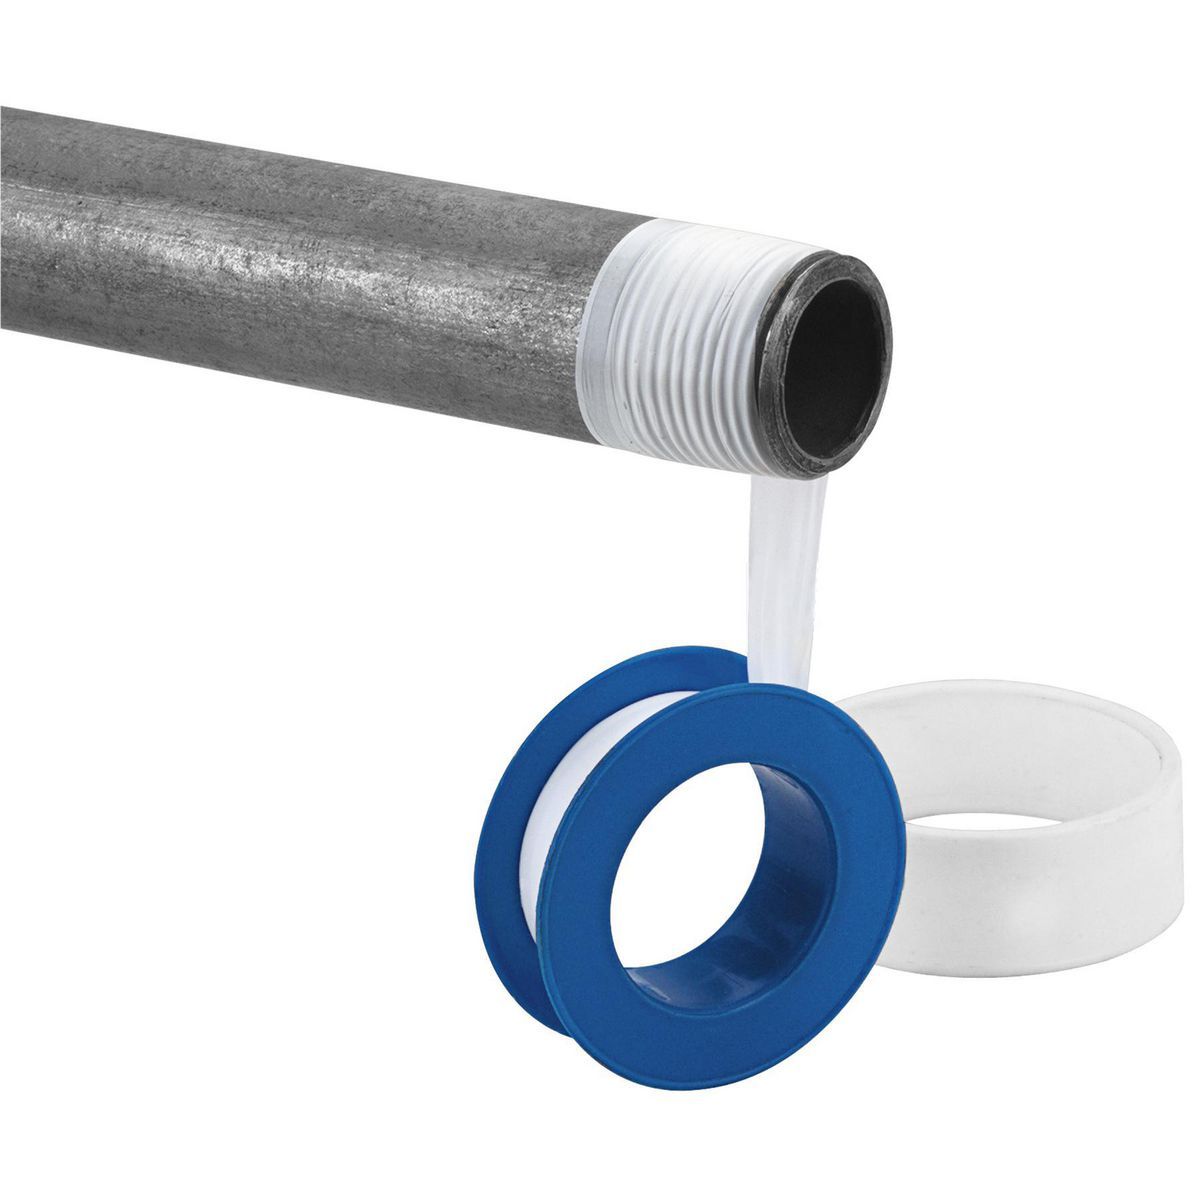 21-2/3 ft. x 1/2 in. Thread Seal Tape